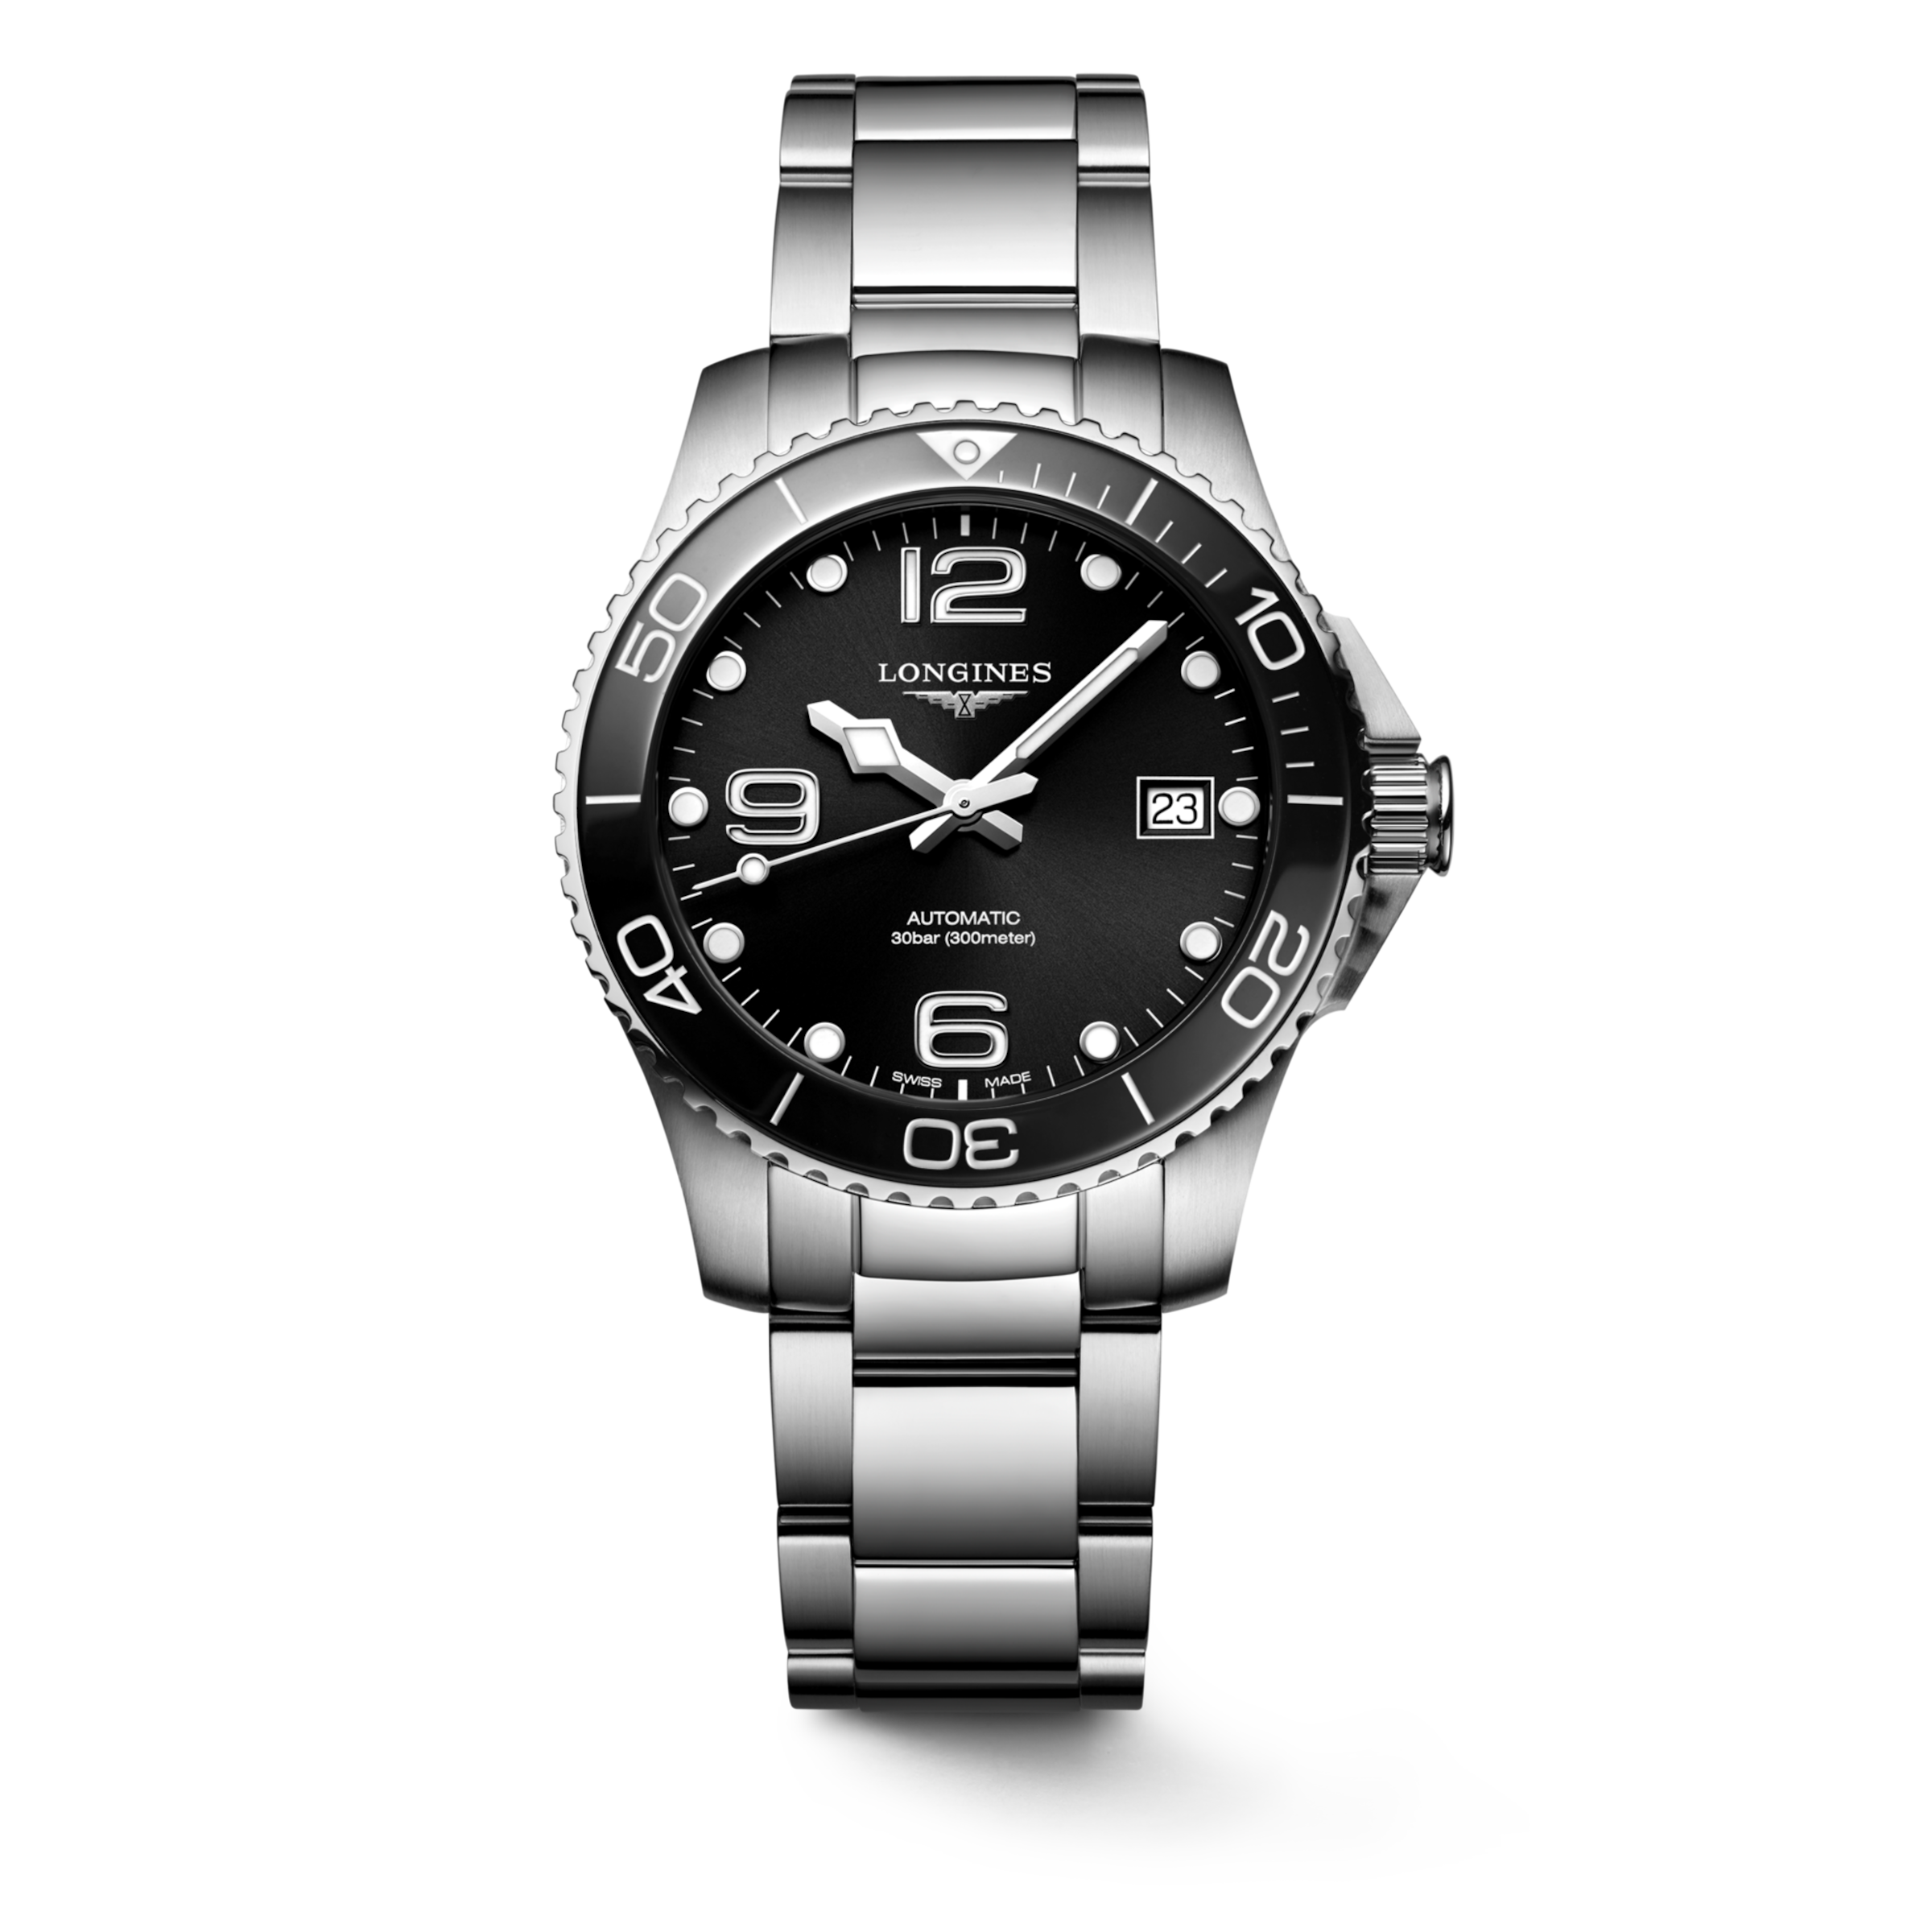 Longines HYDROCONQUEST Automatic Stainless steel and ceramic bezel Watch - L3.780.4.56.6